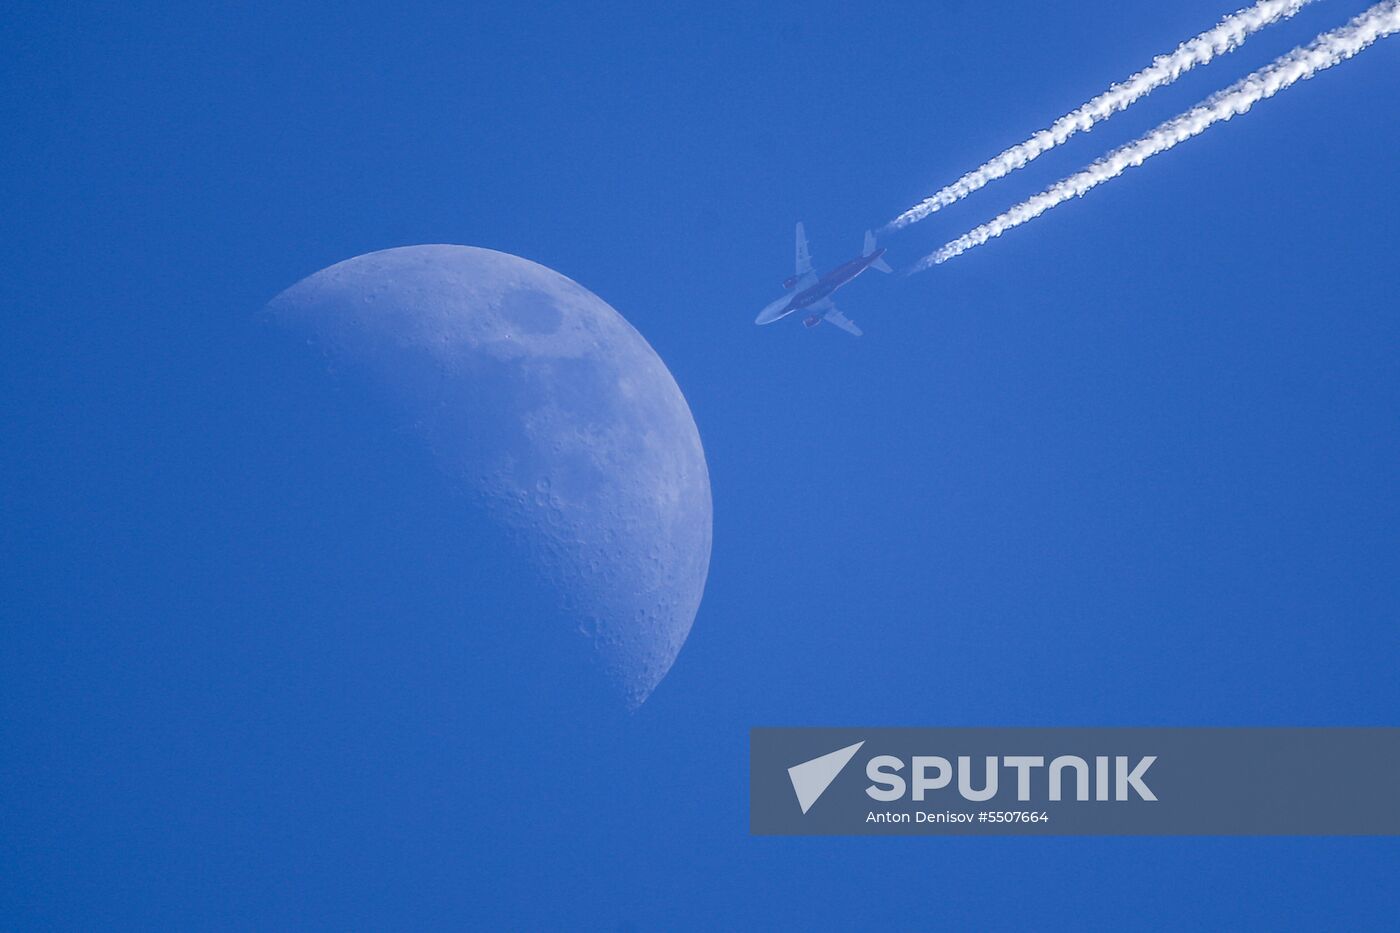 Airplanes fly in the sky with Moon visible